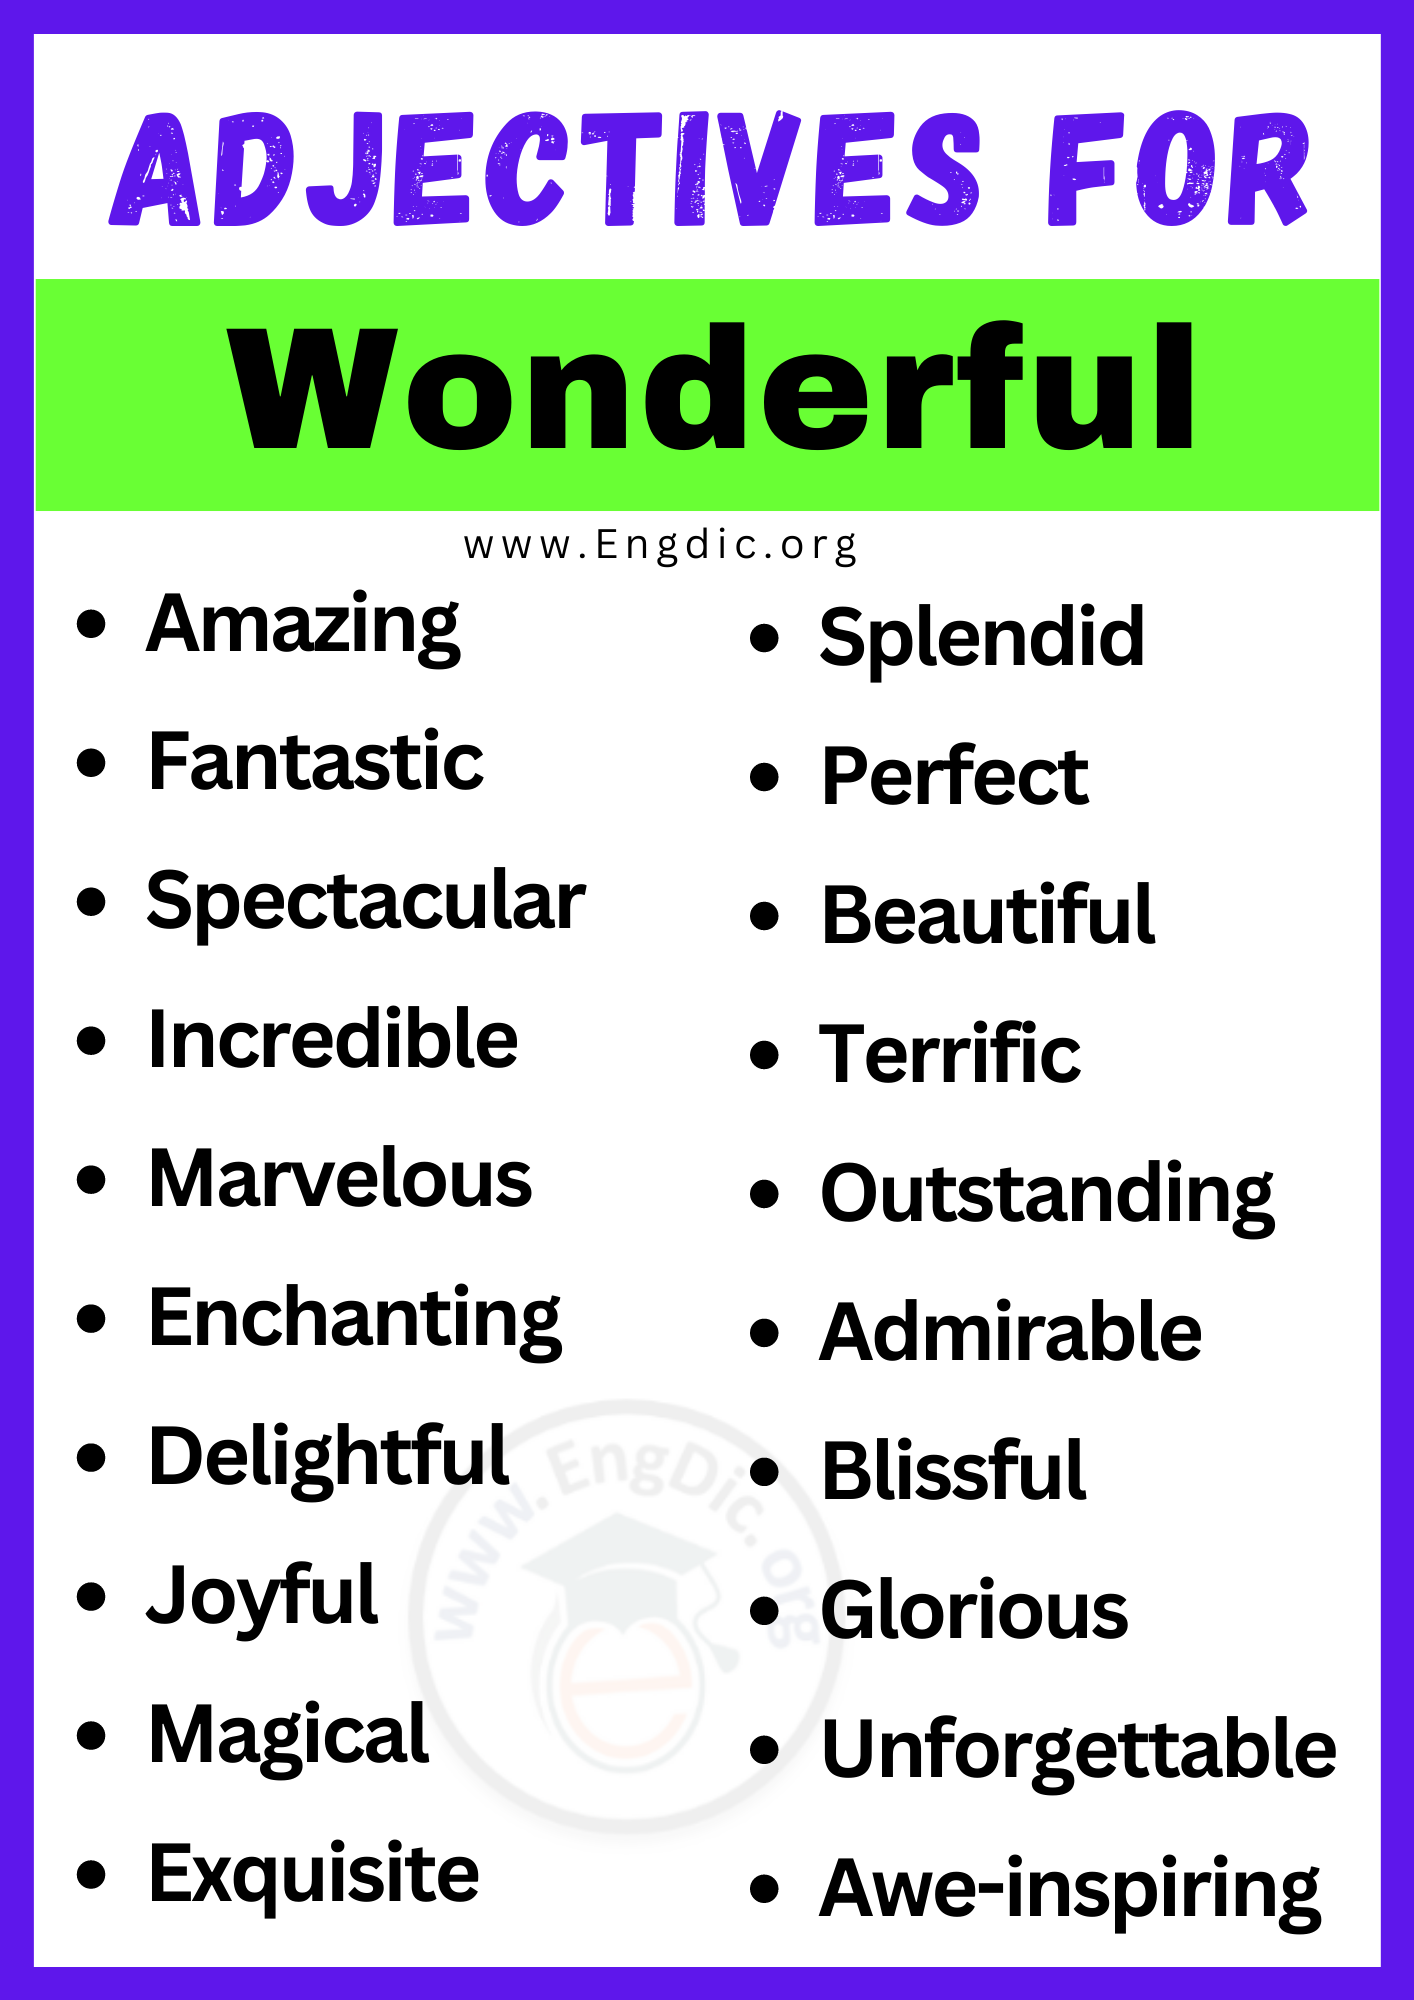 Adjectives for Wonderful